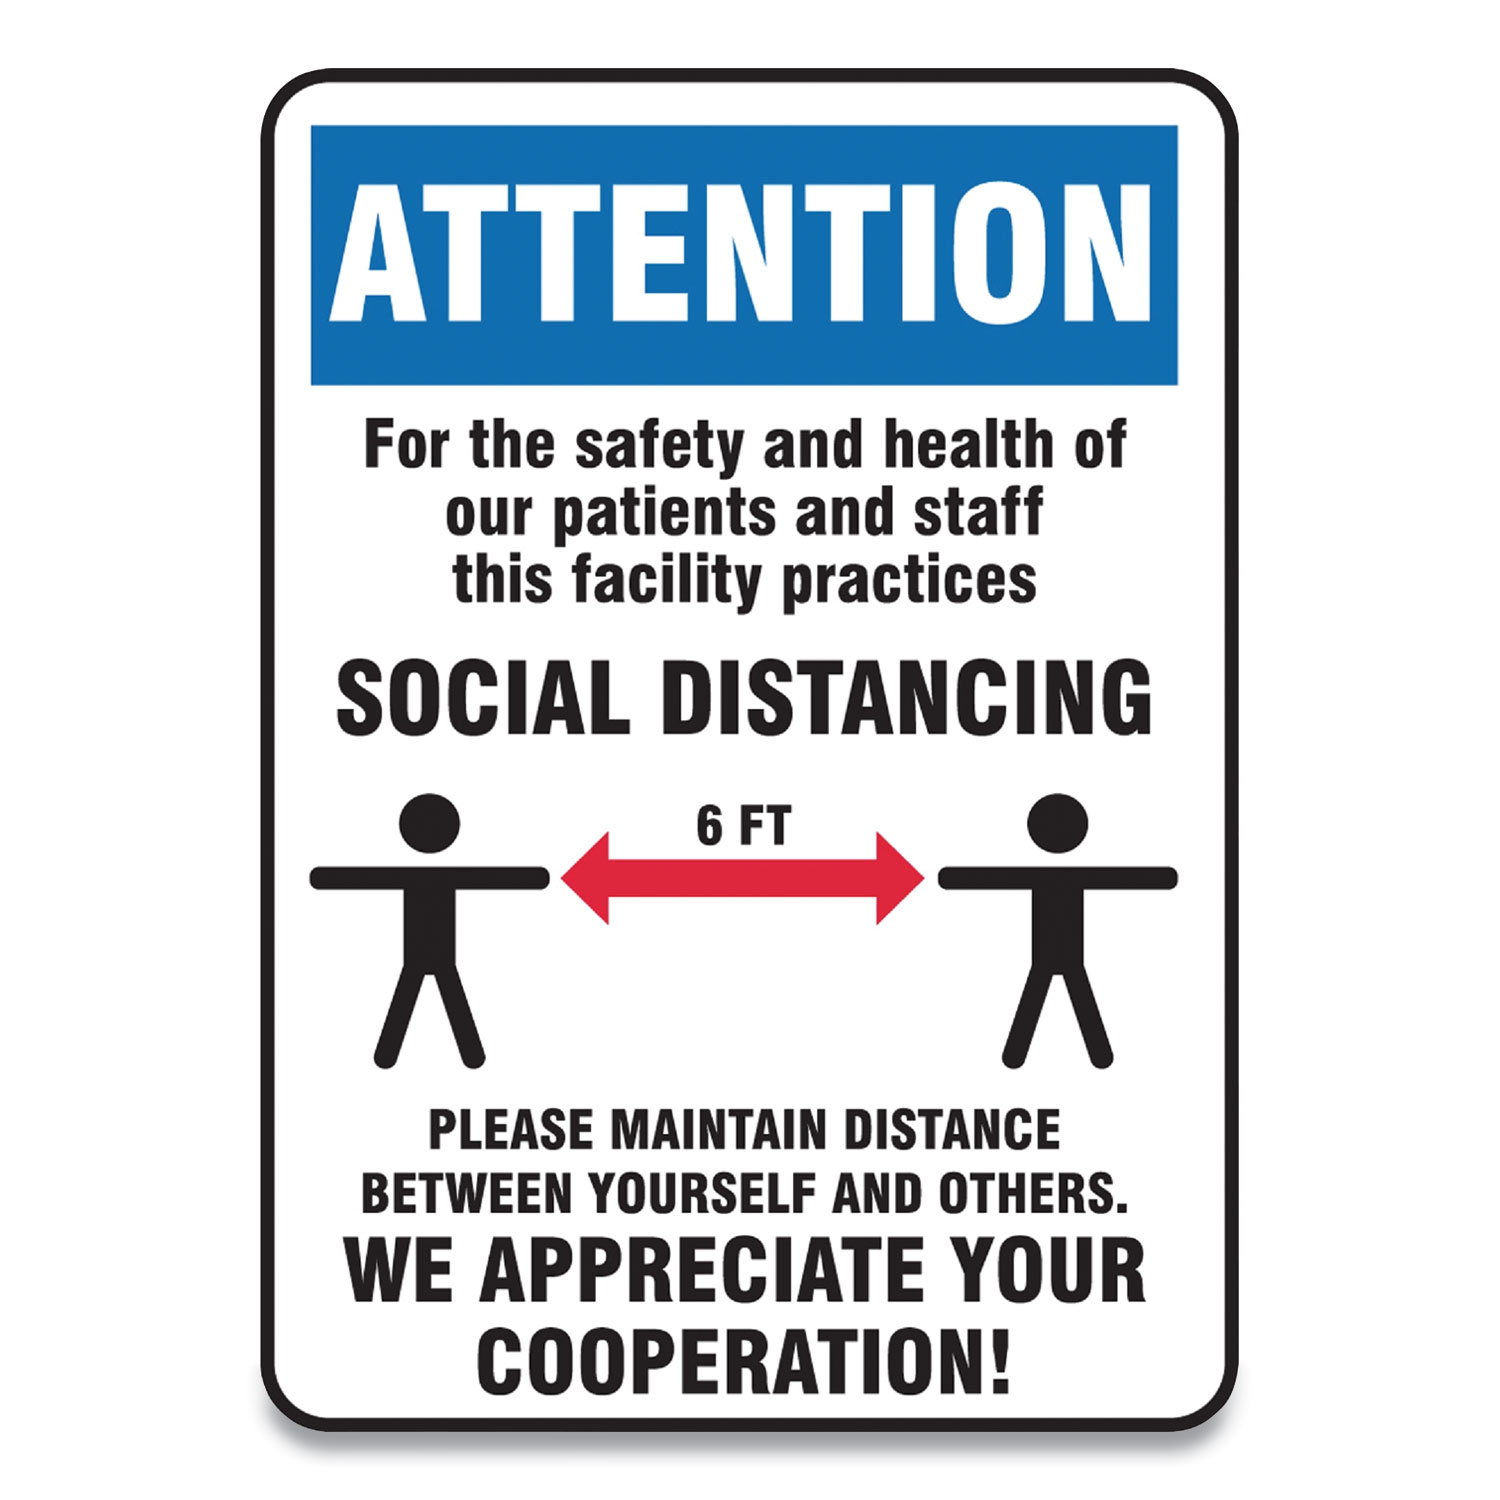  Accuform MGNG903VPESP Social Distance Signs, Wall, 7 x 10, Patients and Staff Social Distancing, Humans/Arrows, Blue/White, 10/Pack (GN1MGNG903VPESP) 